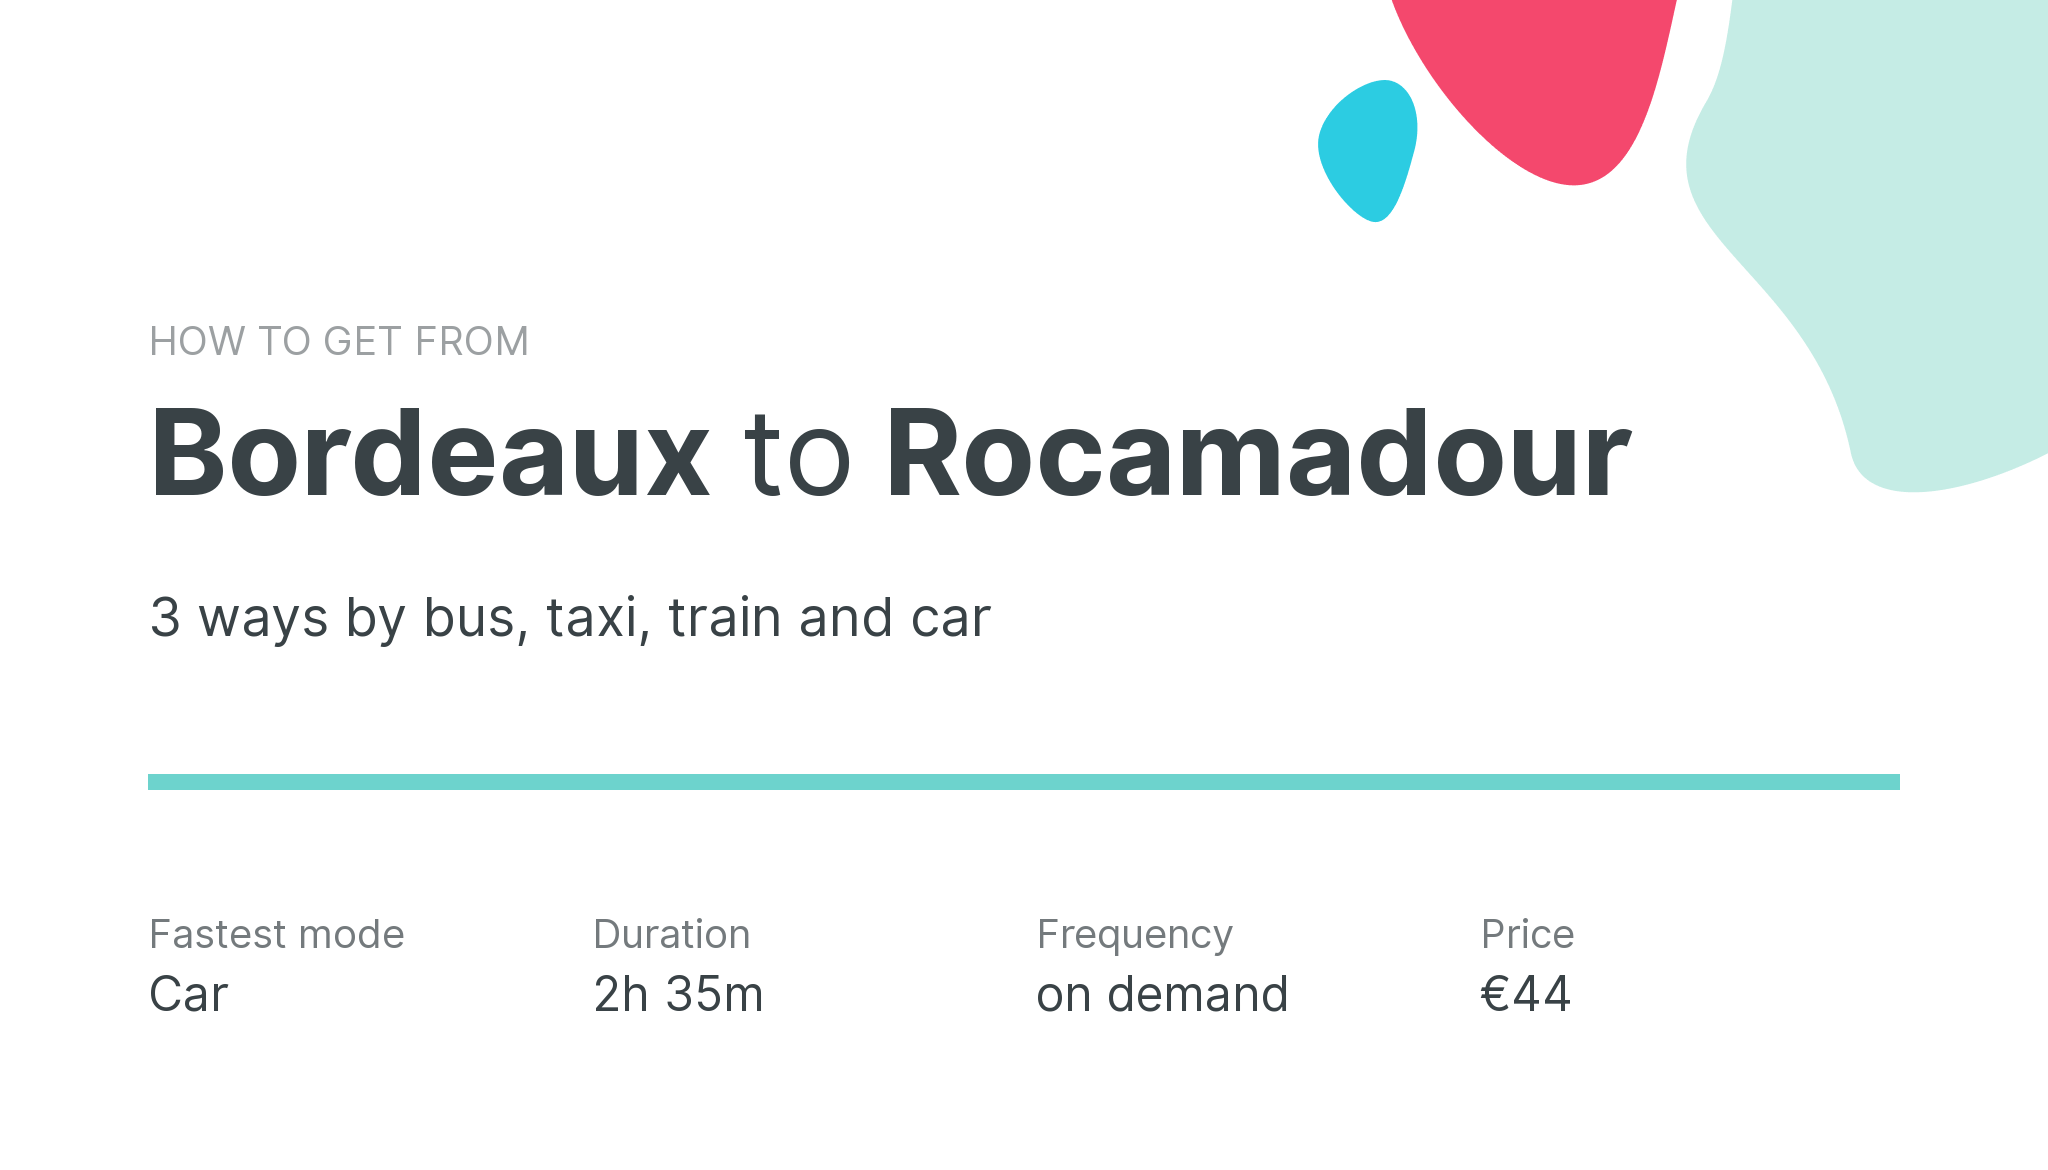 How do I get from Bordeaux to Rocamadour